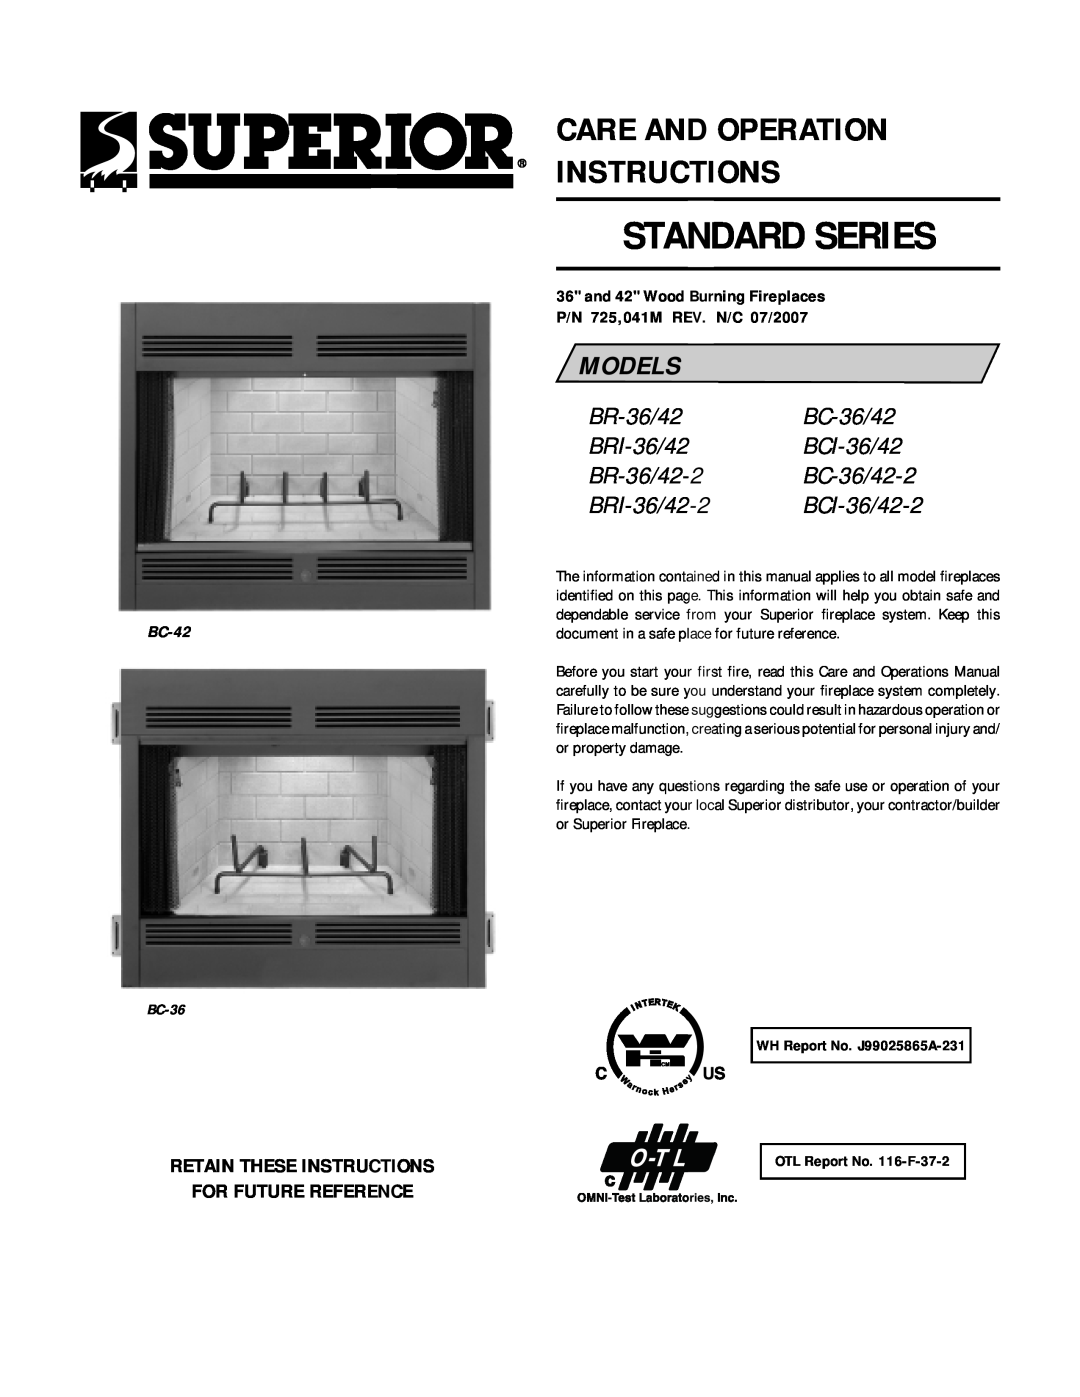 Superior BC-36/42-2, BRI-36/42-2 manual Retain These Instructions For Future Reference, Standard Series, Models, BC-42 